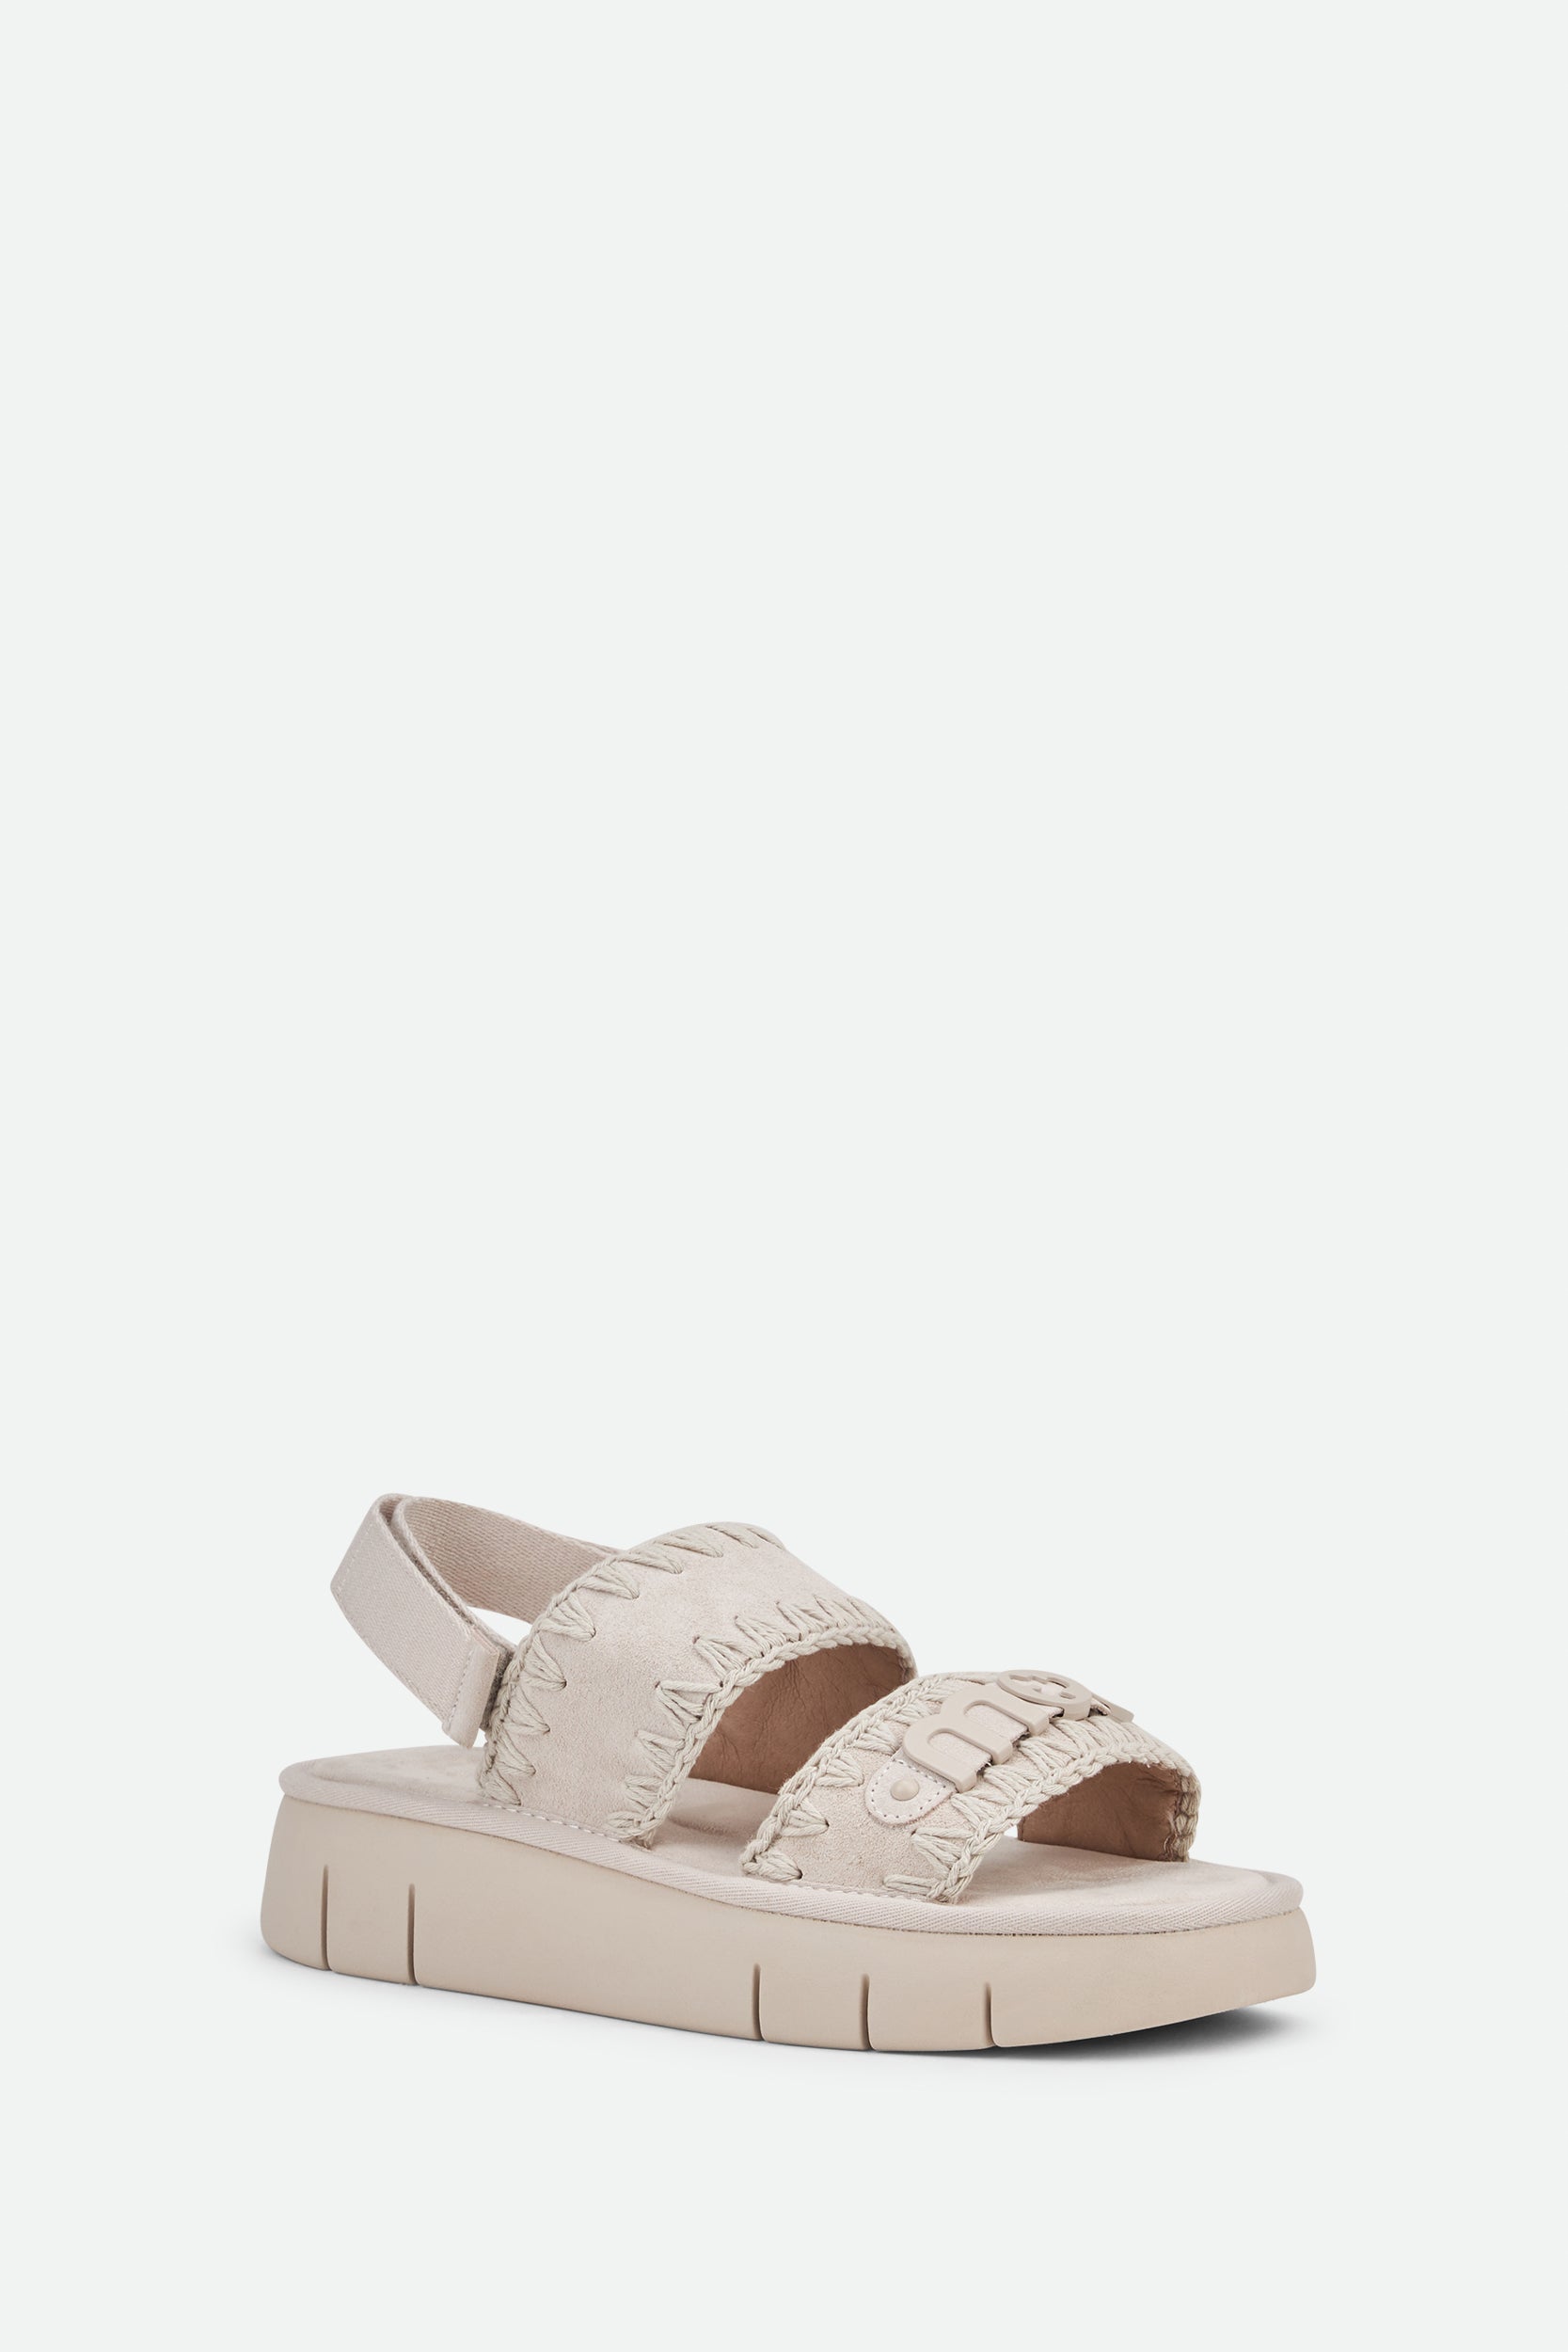 Mou Bounce White Sandals